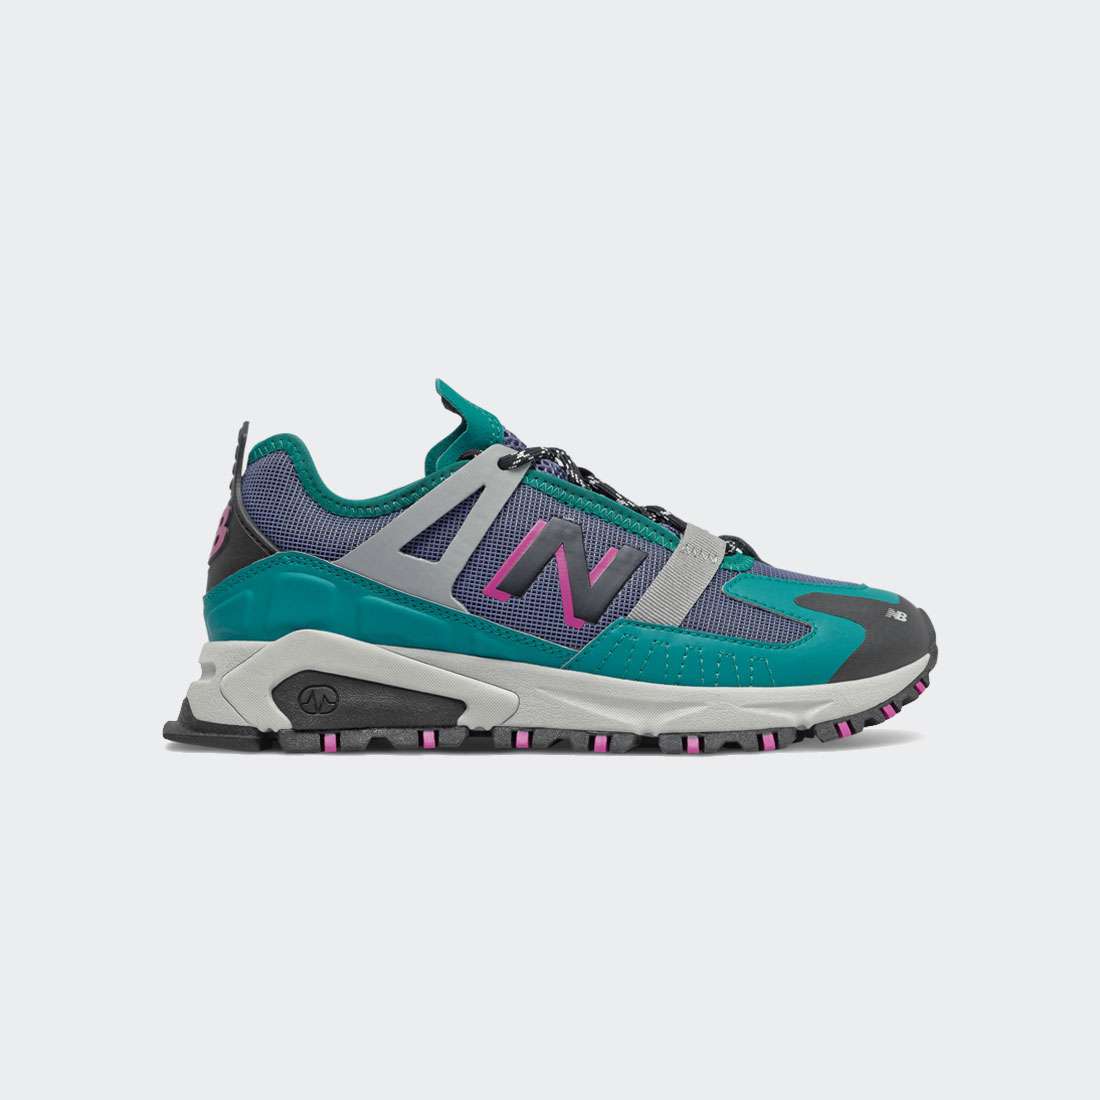 NEW BALANCE XRCT TEAM TEAL/MAGNETIC BLUE